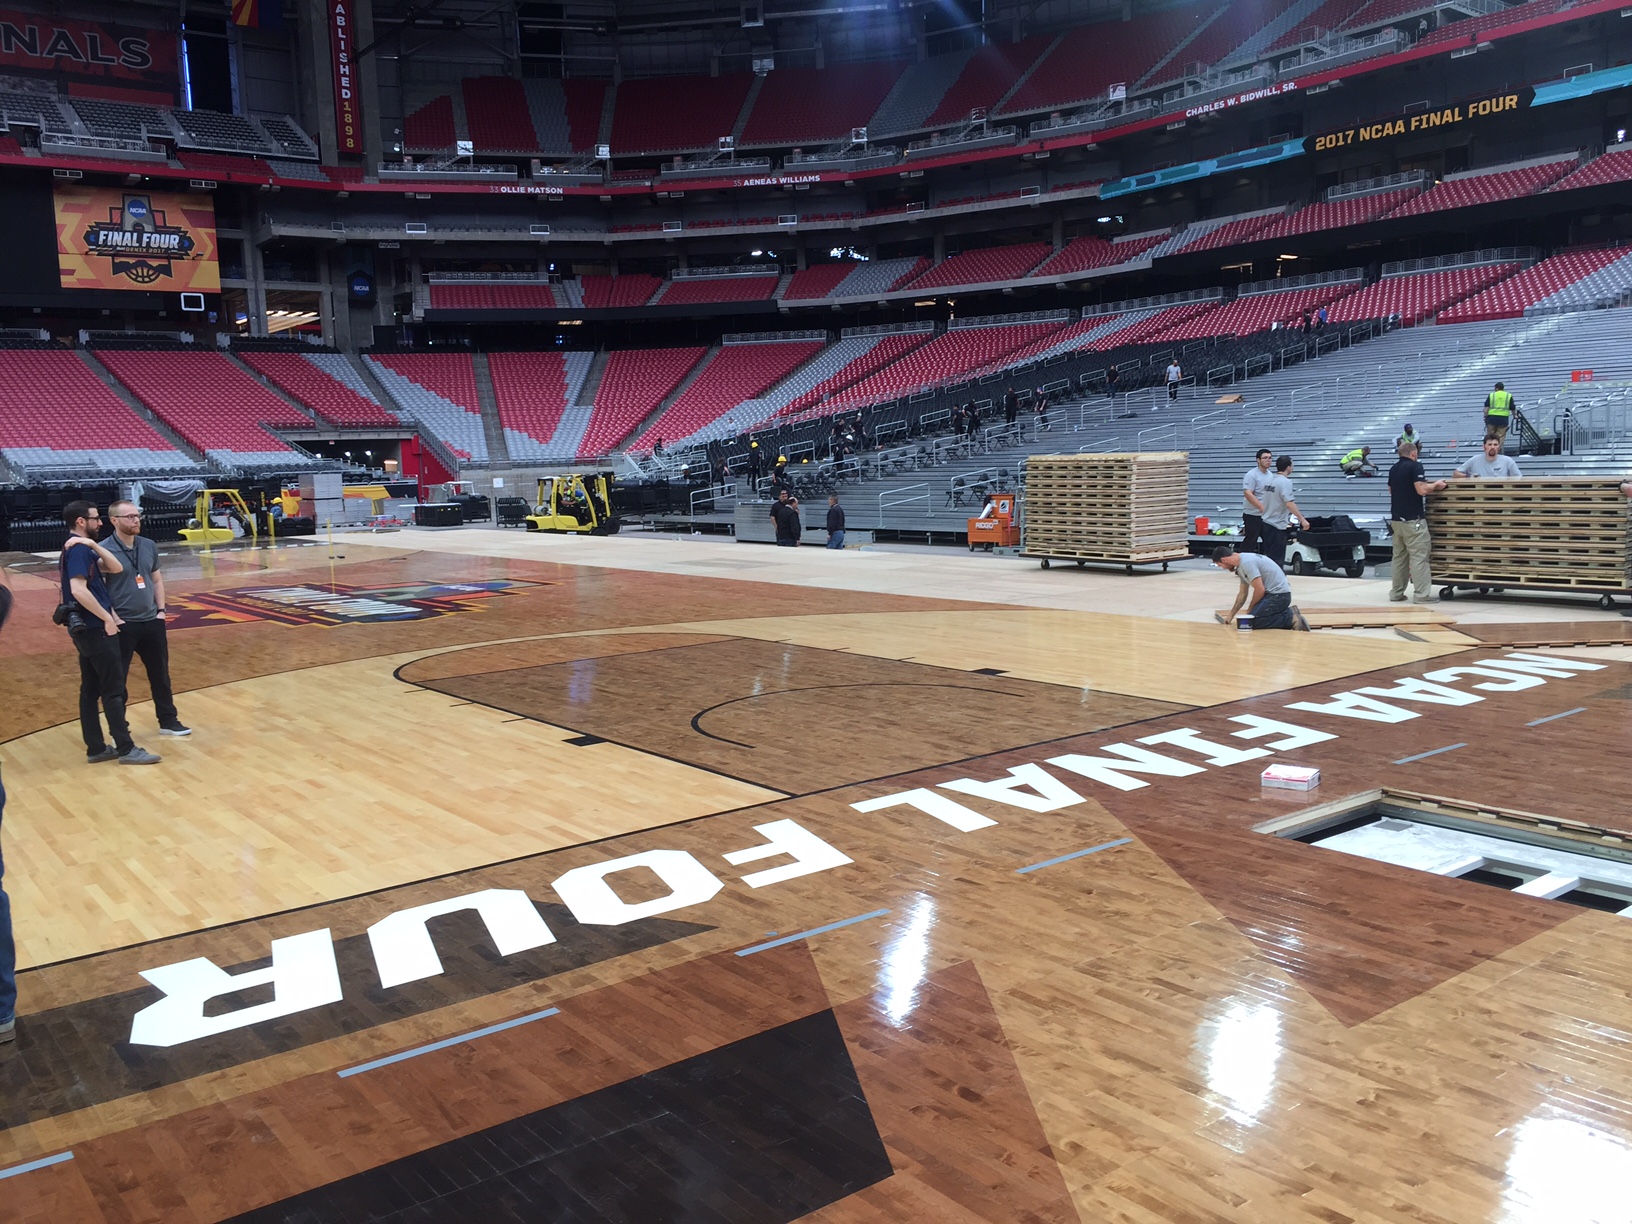 Connor Sports installs the Official Court for the 2017 NCAA Men's Final Four